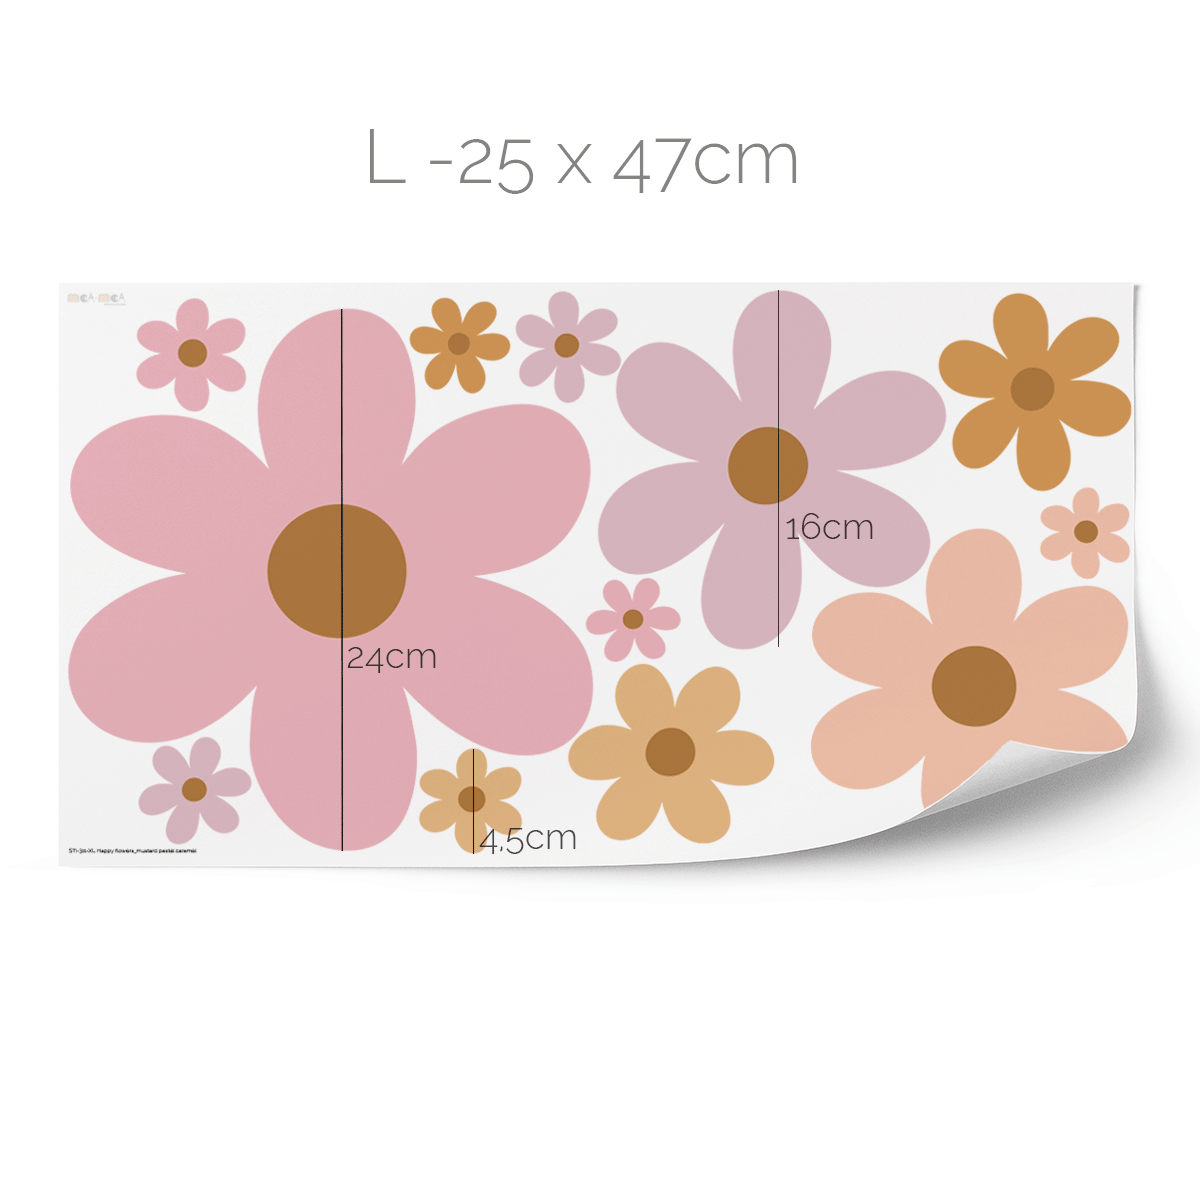 Flower wall stickers - Happy blooms (caramel-pastel shades)